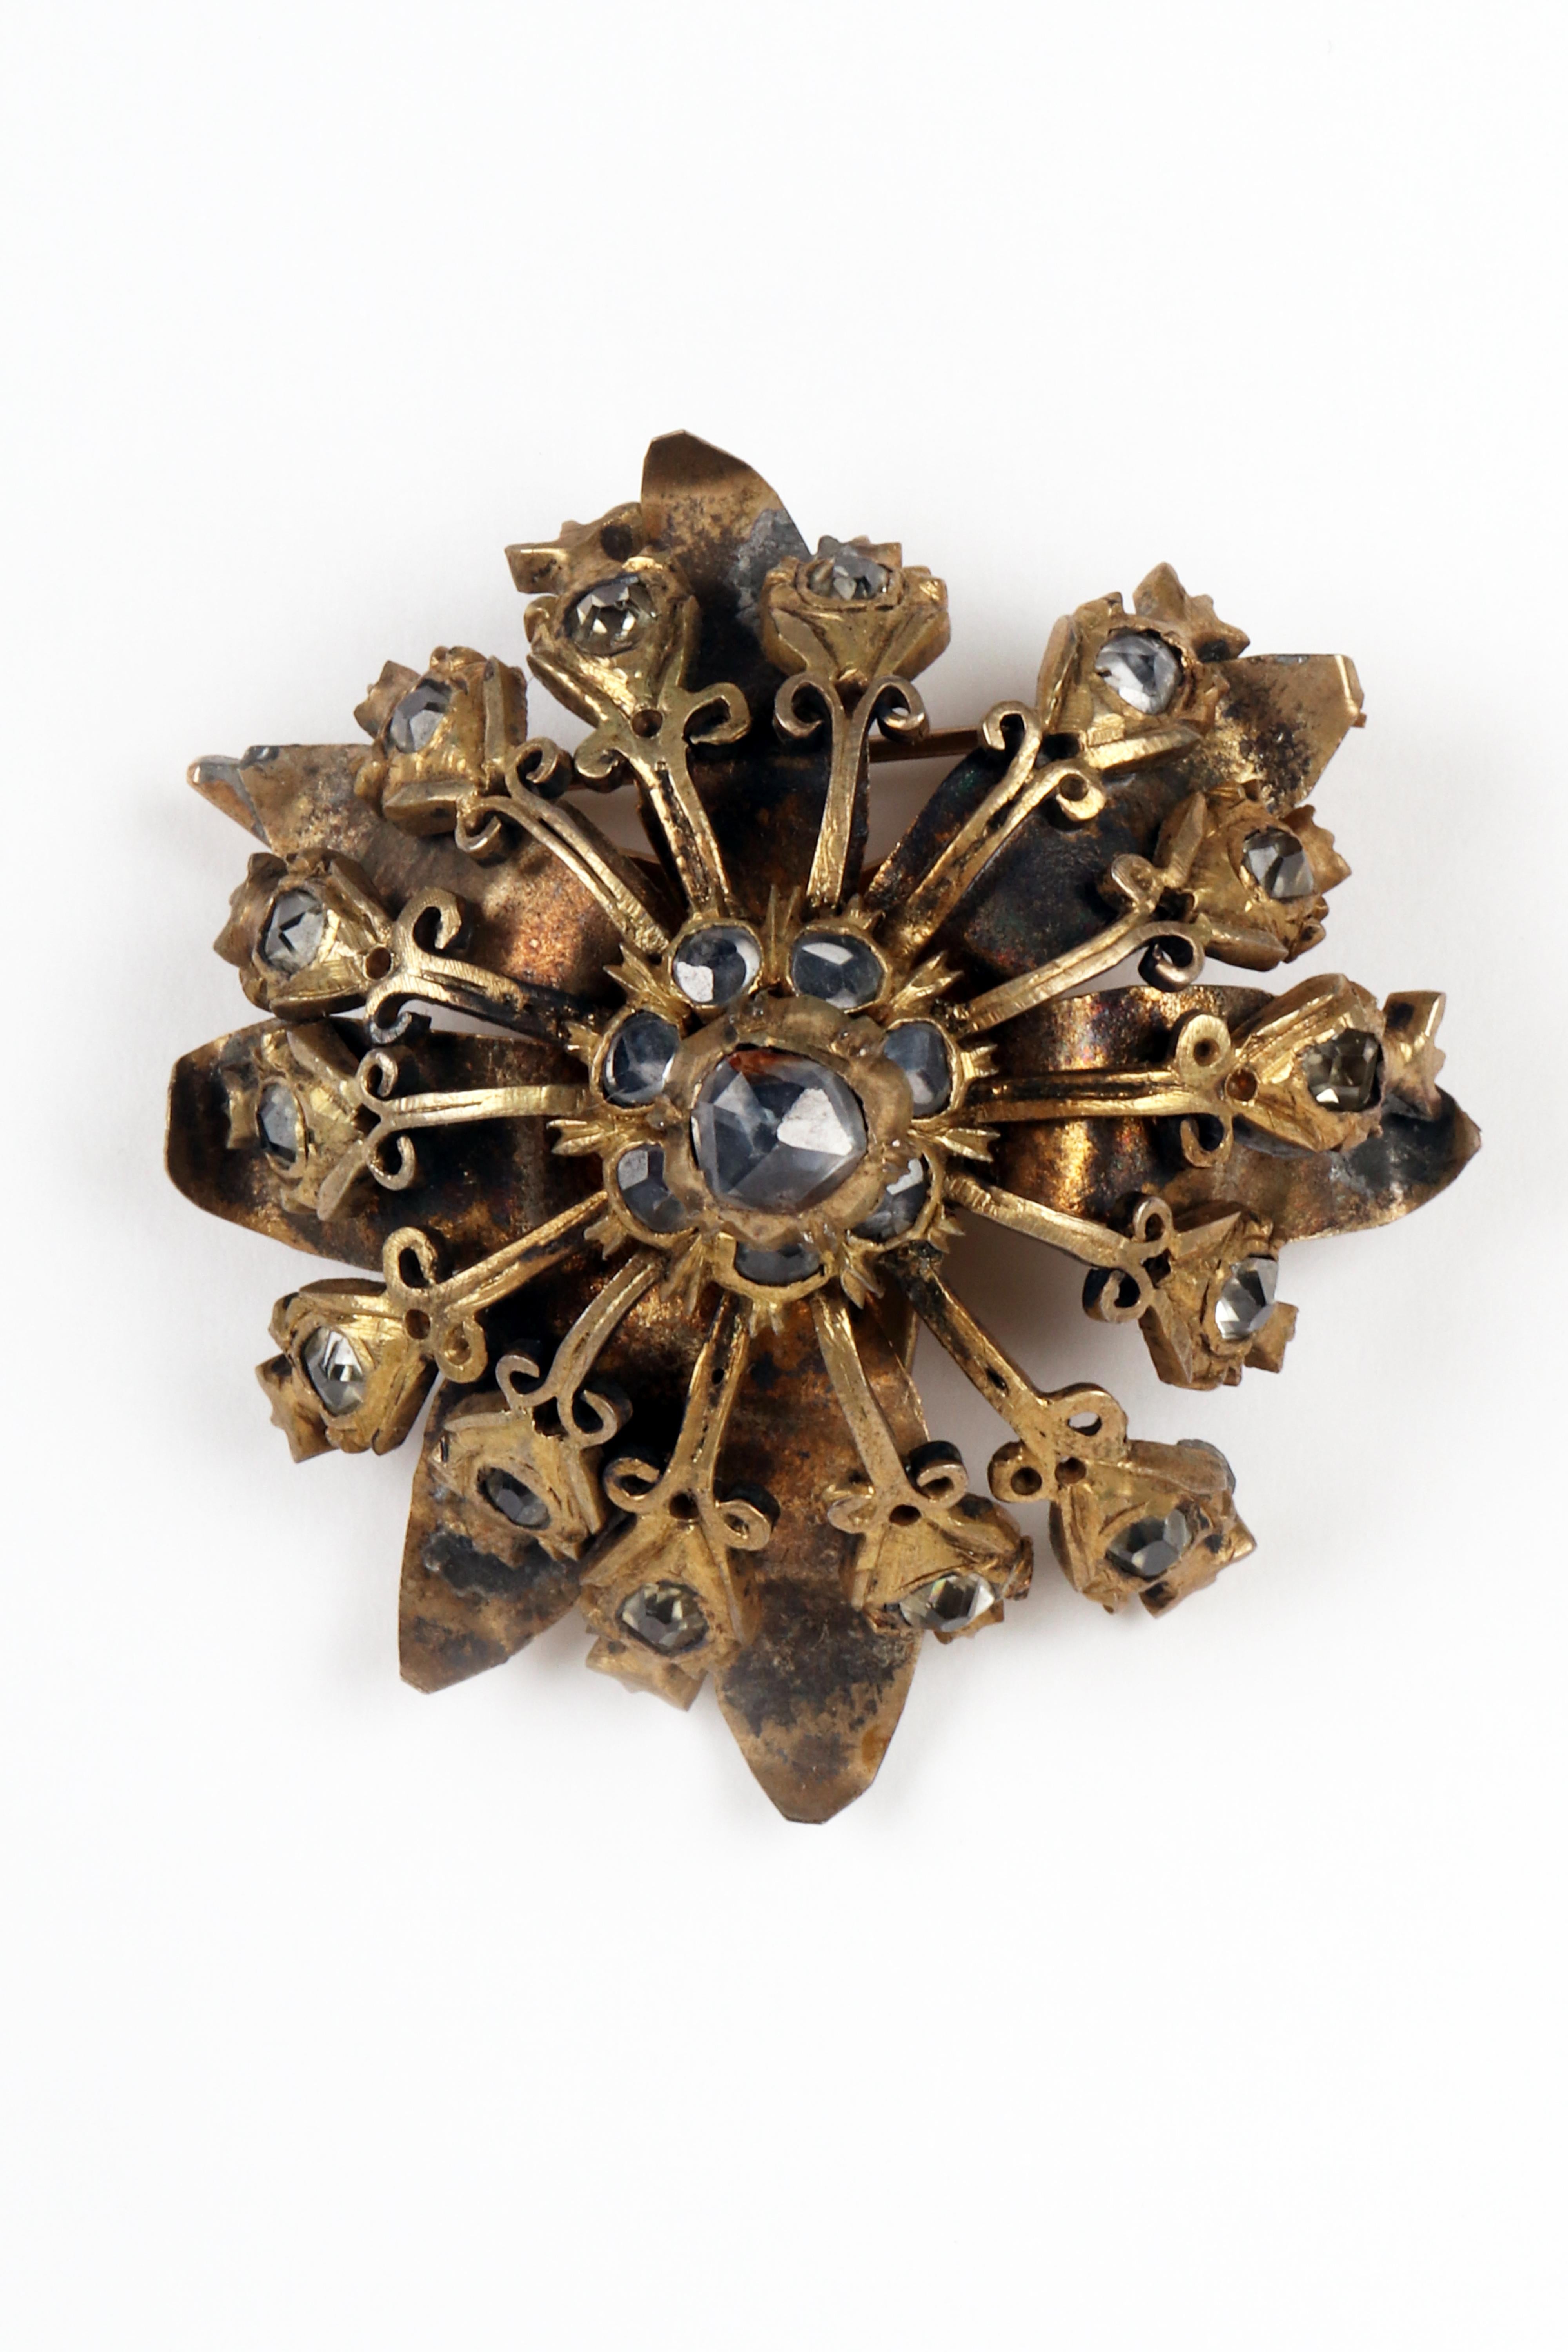 Button-parade brooch in golden metal and diamonds from India for the English market. The base is made up of a continuous laminar body element that opens into petals with twisted tips at the center of which is hinged a first radial pattern of